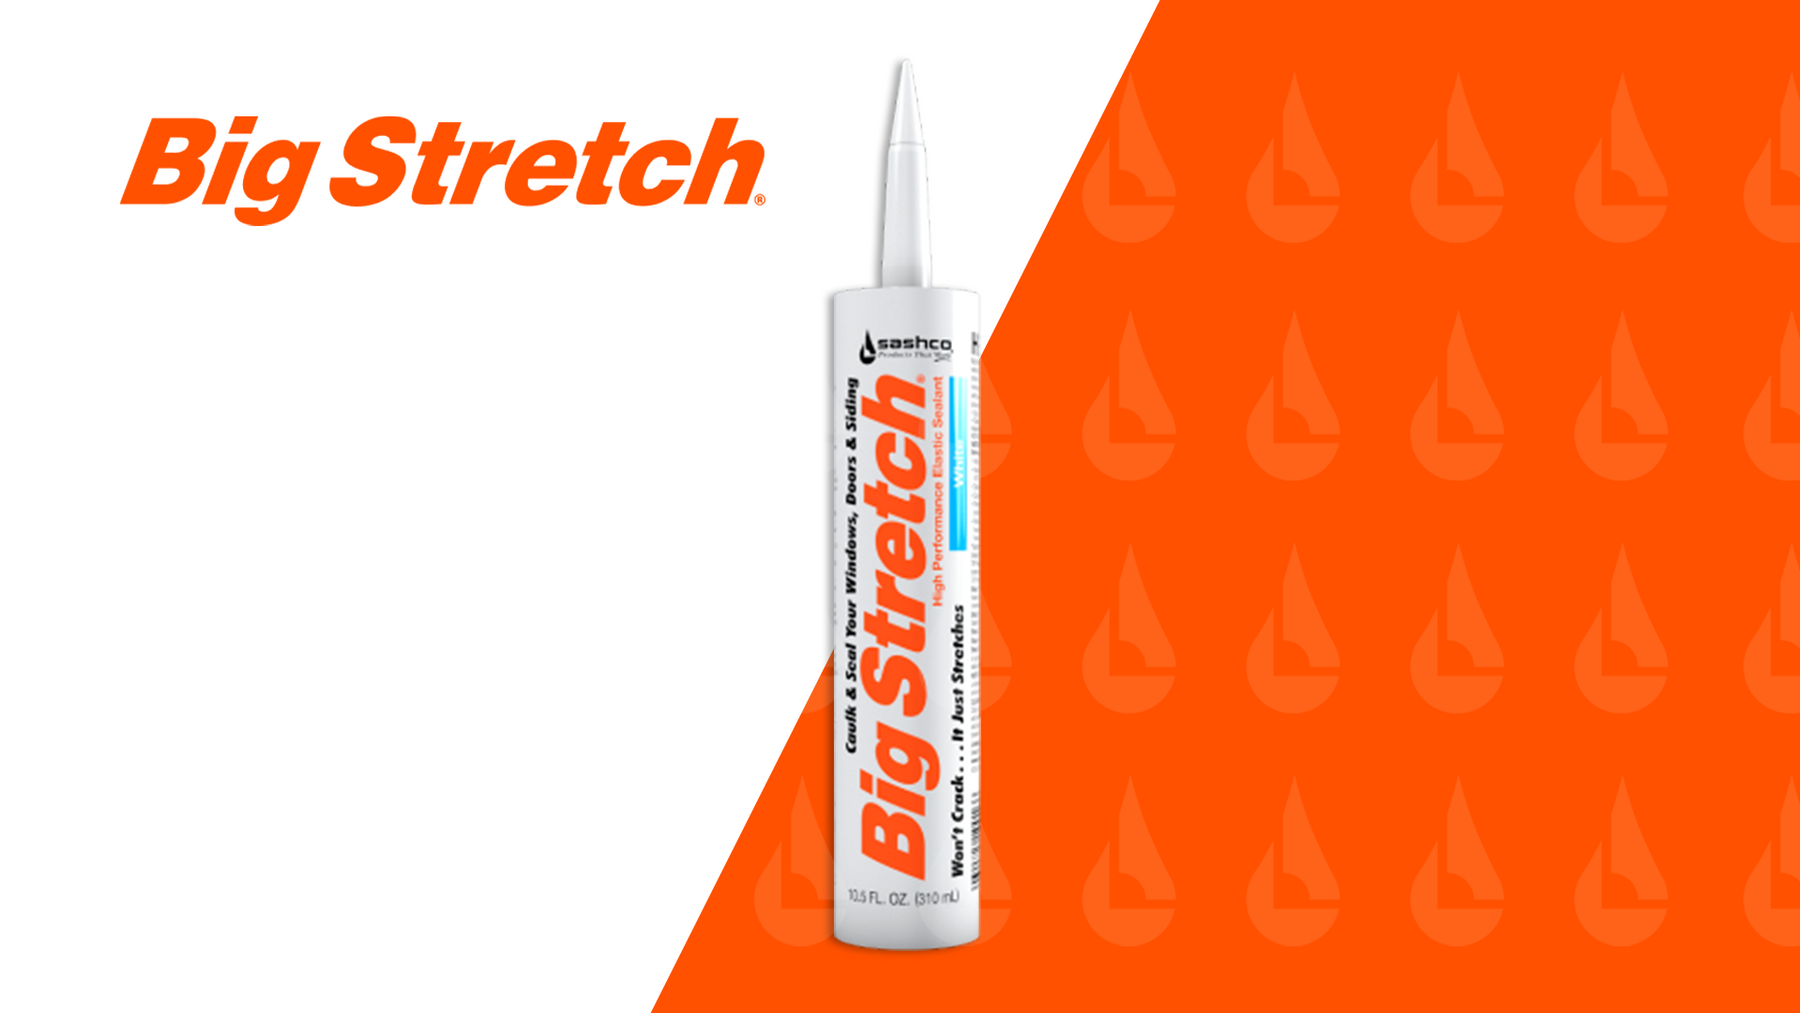 Sashco Big Stretch: The Sealant That Moves With Your Home